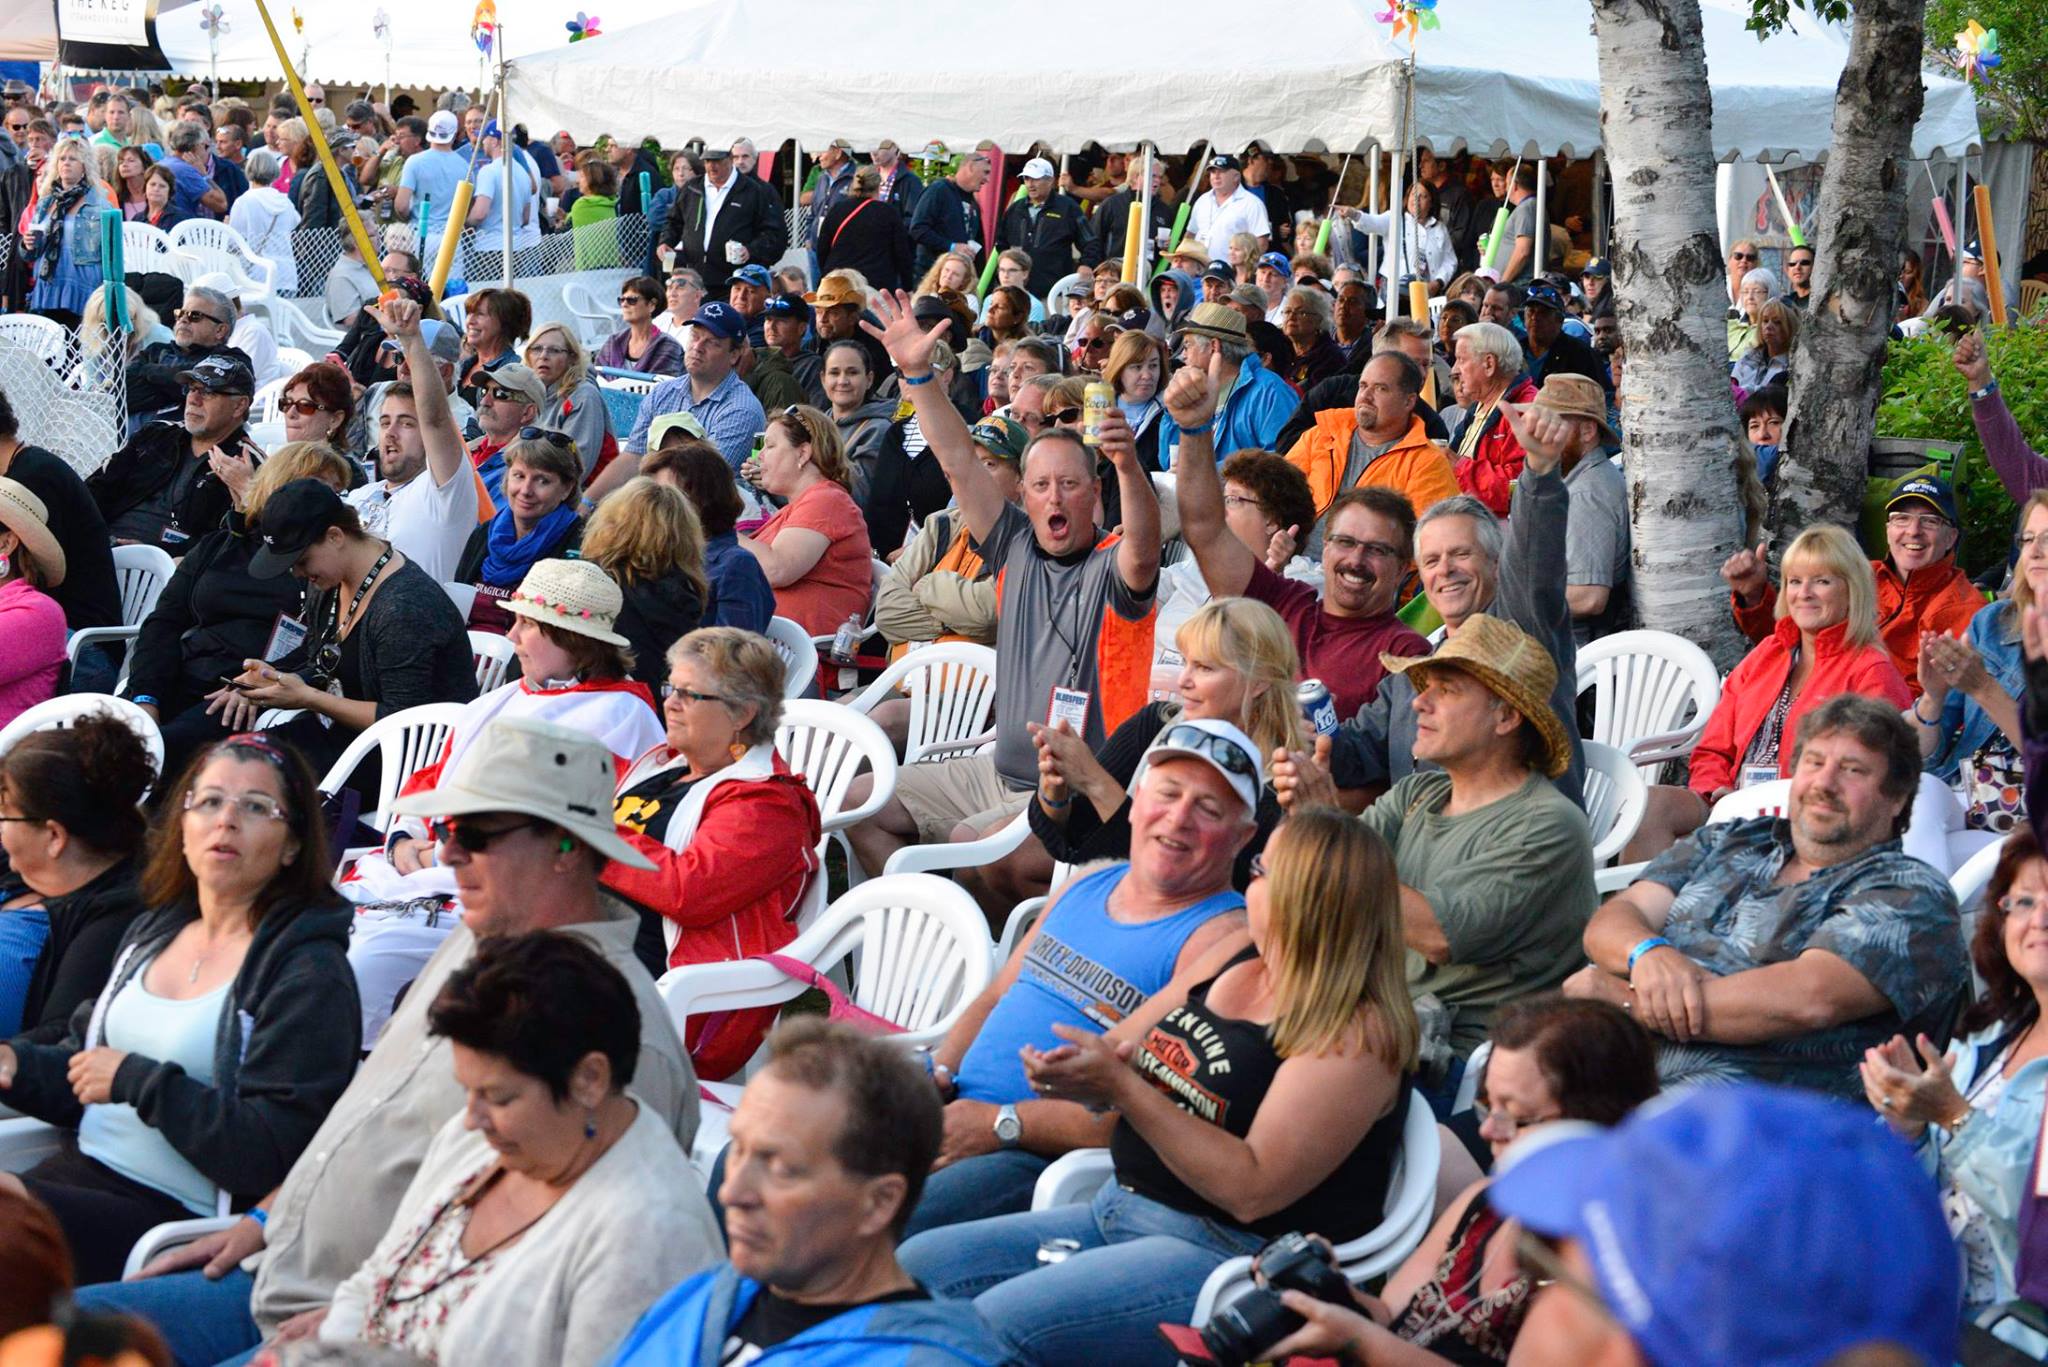 It’s Official – Record Attendance At The 2016 Blues Fest